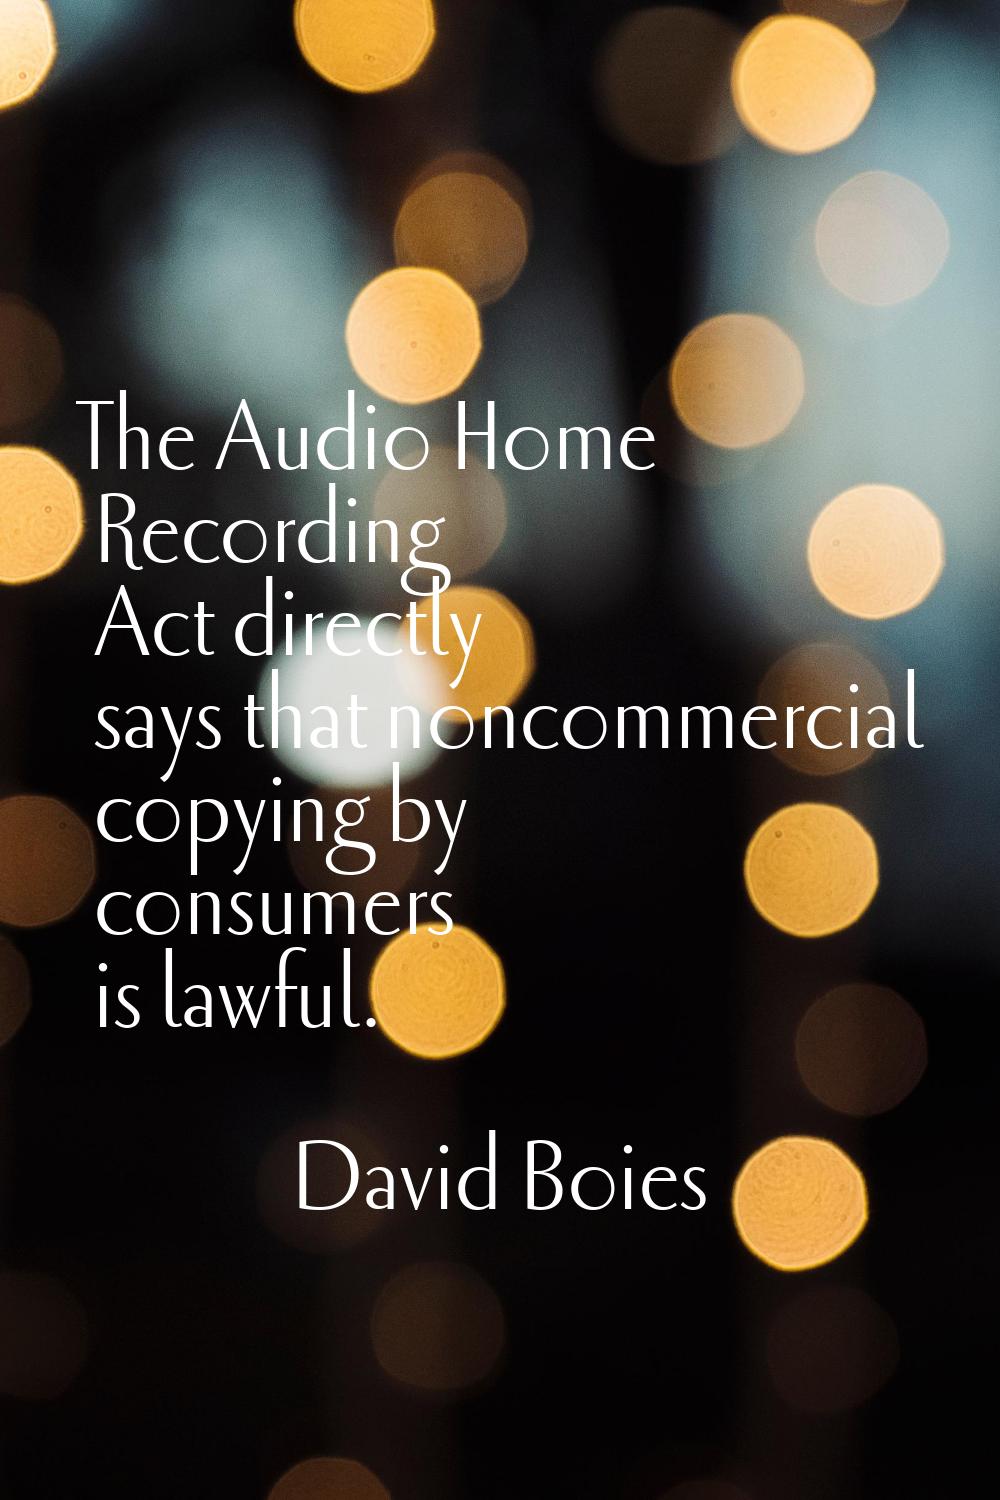 The Audio Home Recording Act directly says that noncommercial copying by consumers is lawful.